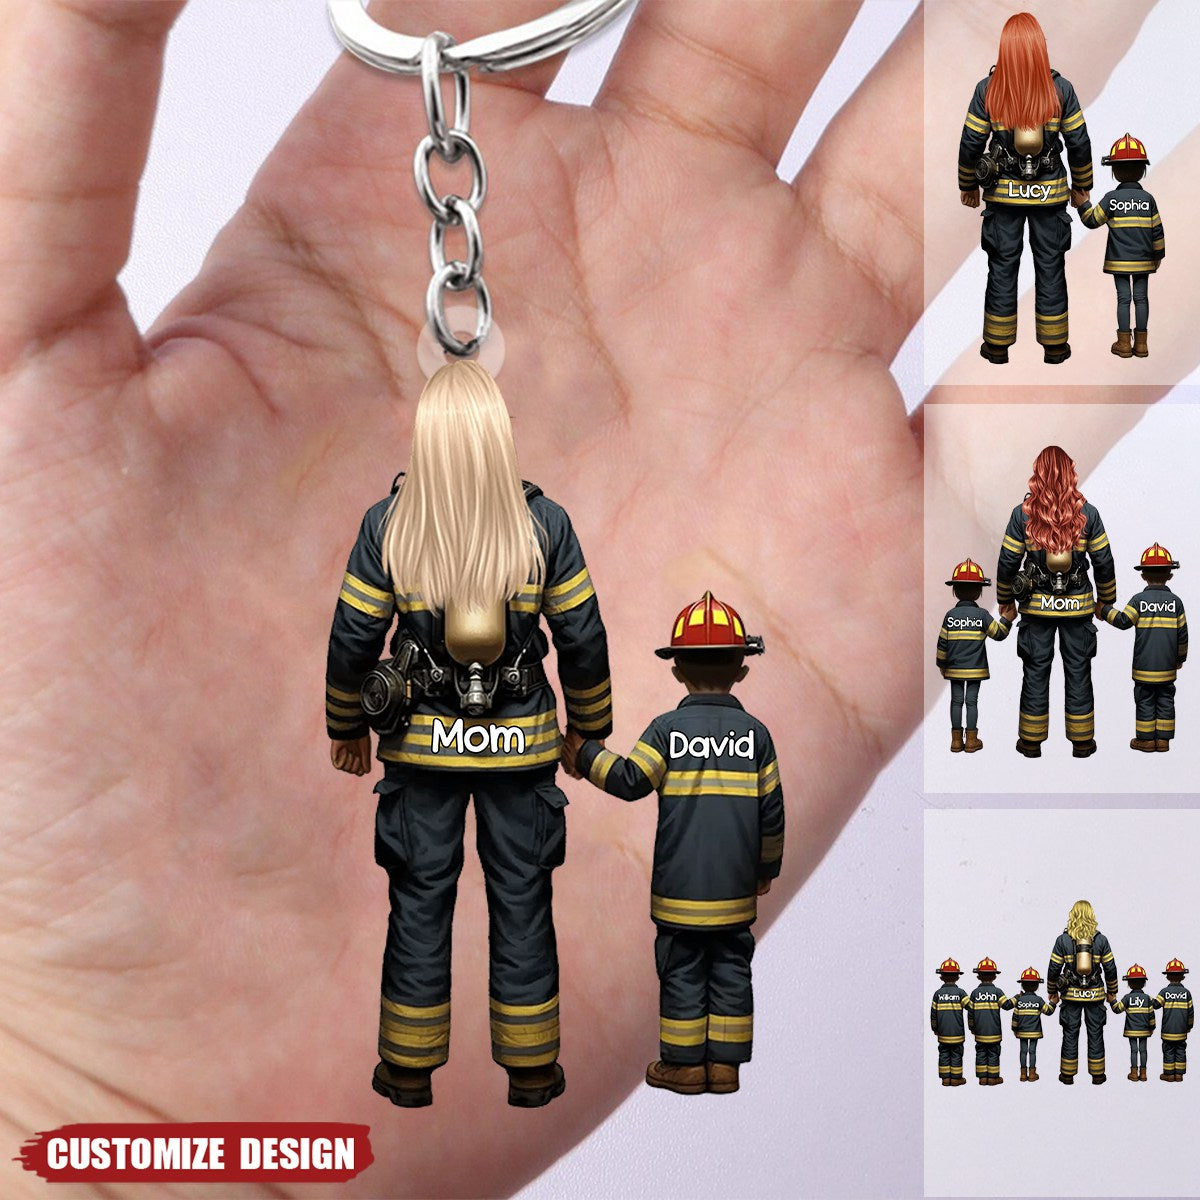 Firefighter Mom And Kids - Personalized Acrylic Keychain